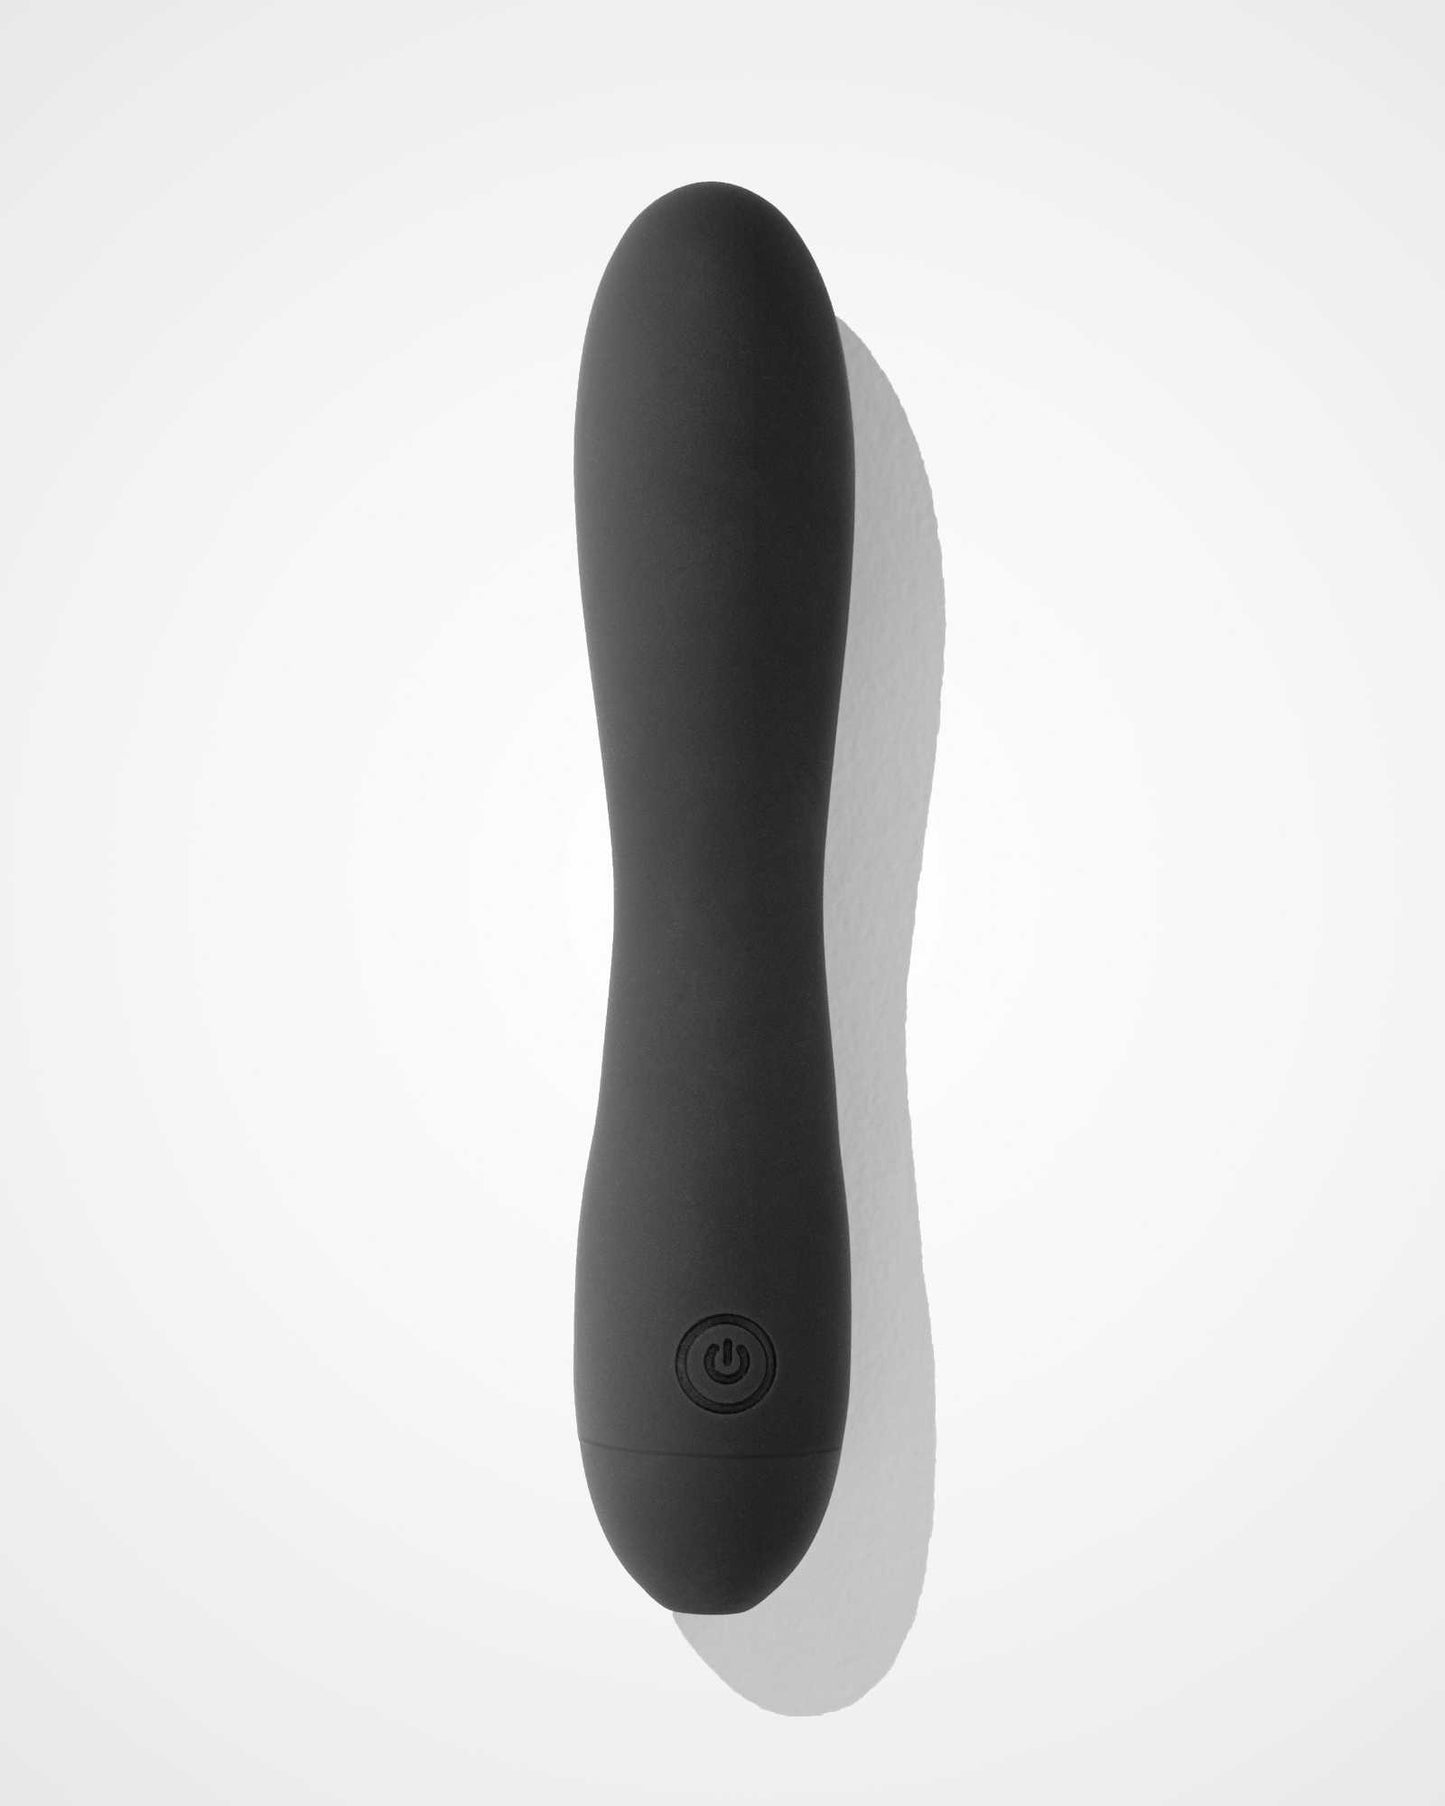 Sangya 1 : Country's first Made in India Personal Massager